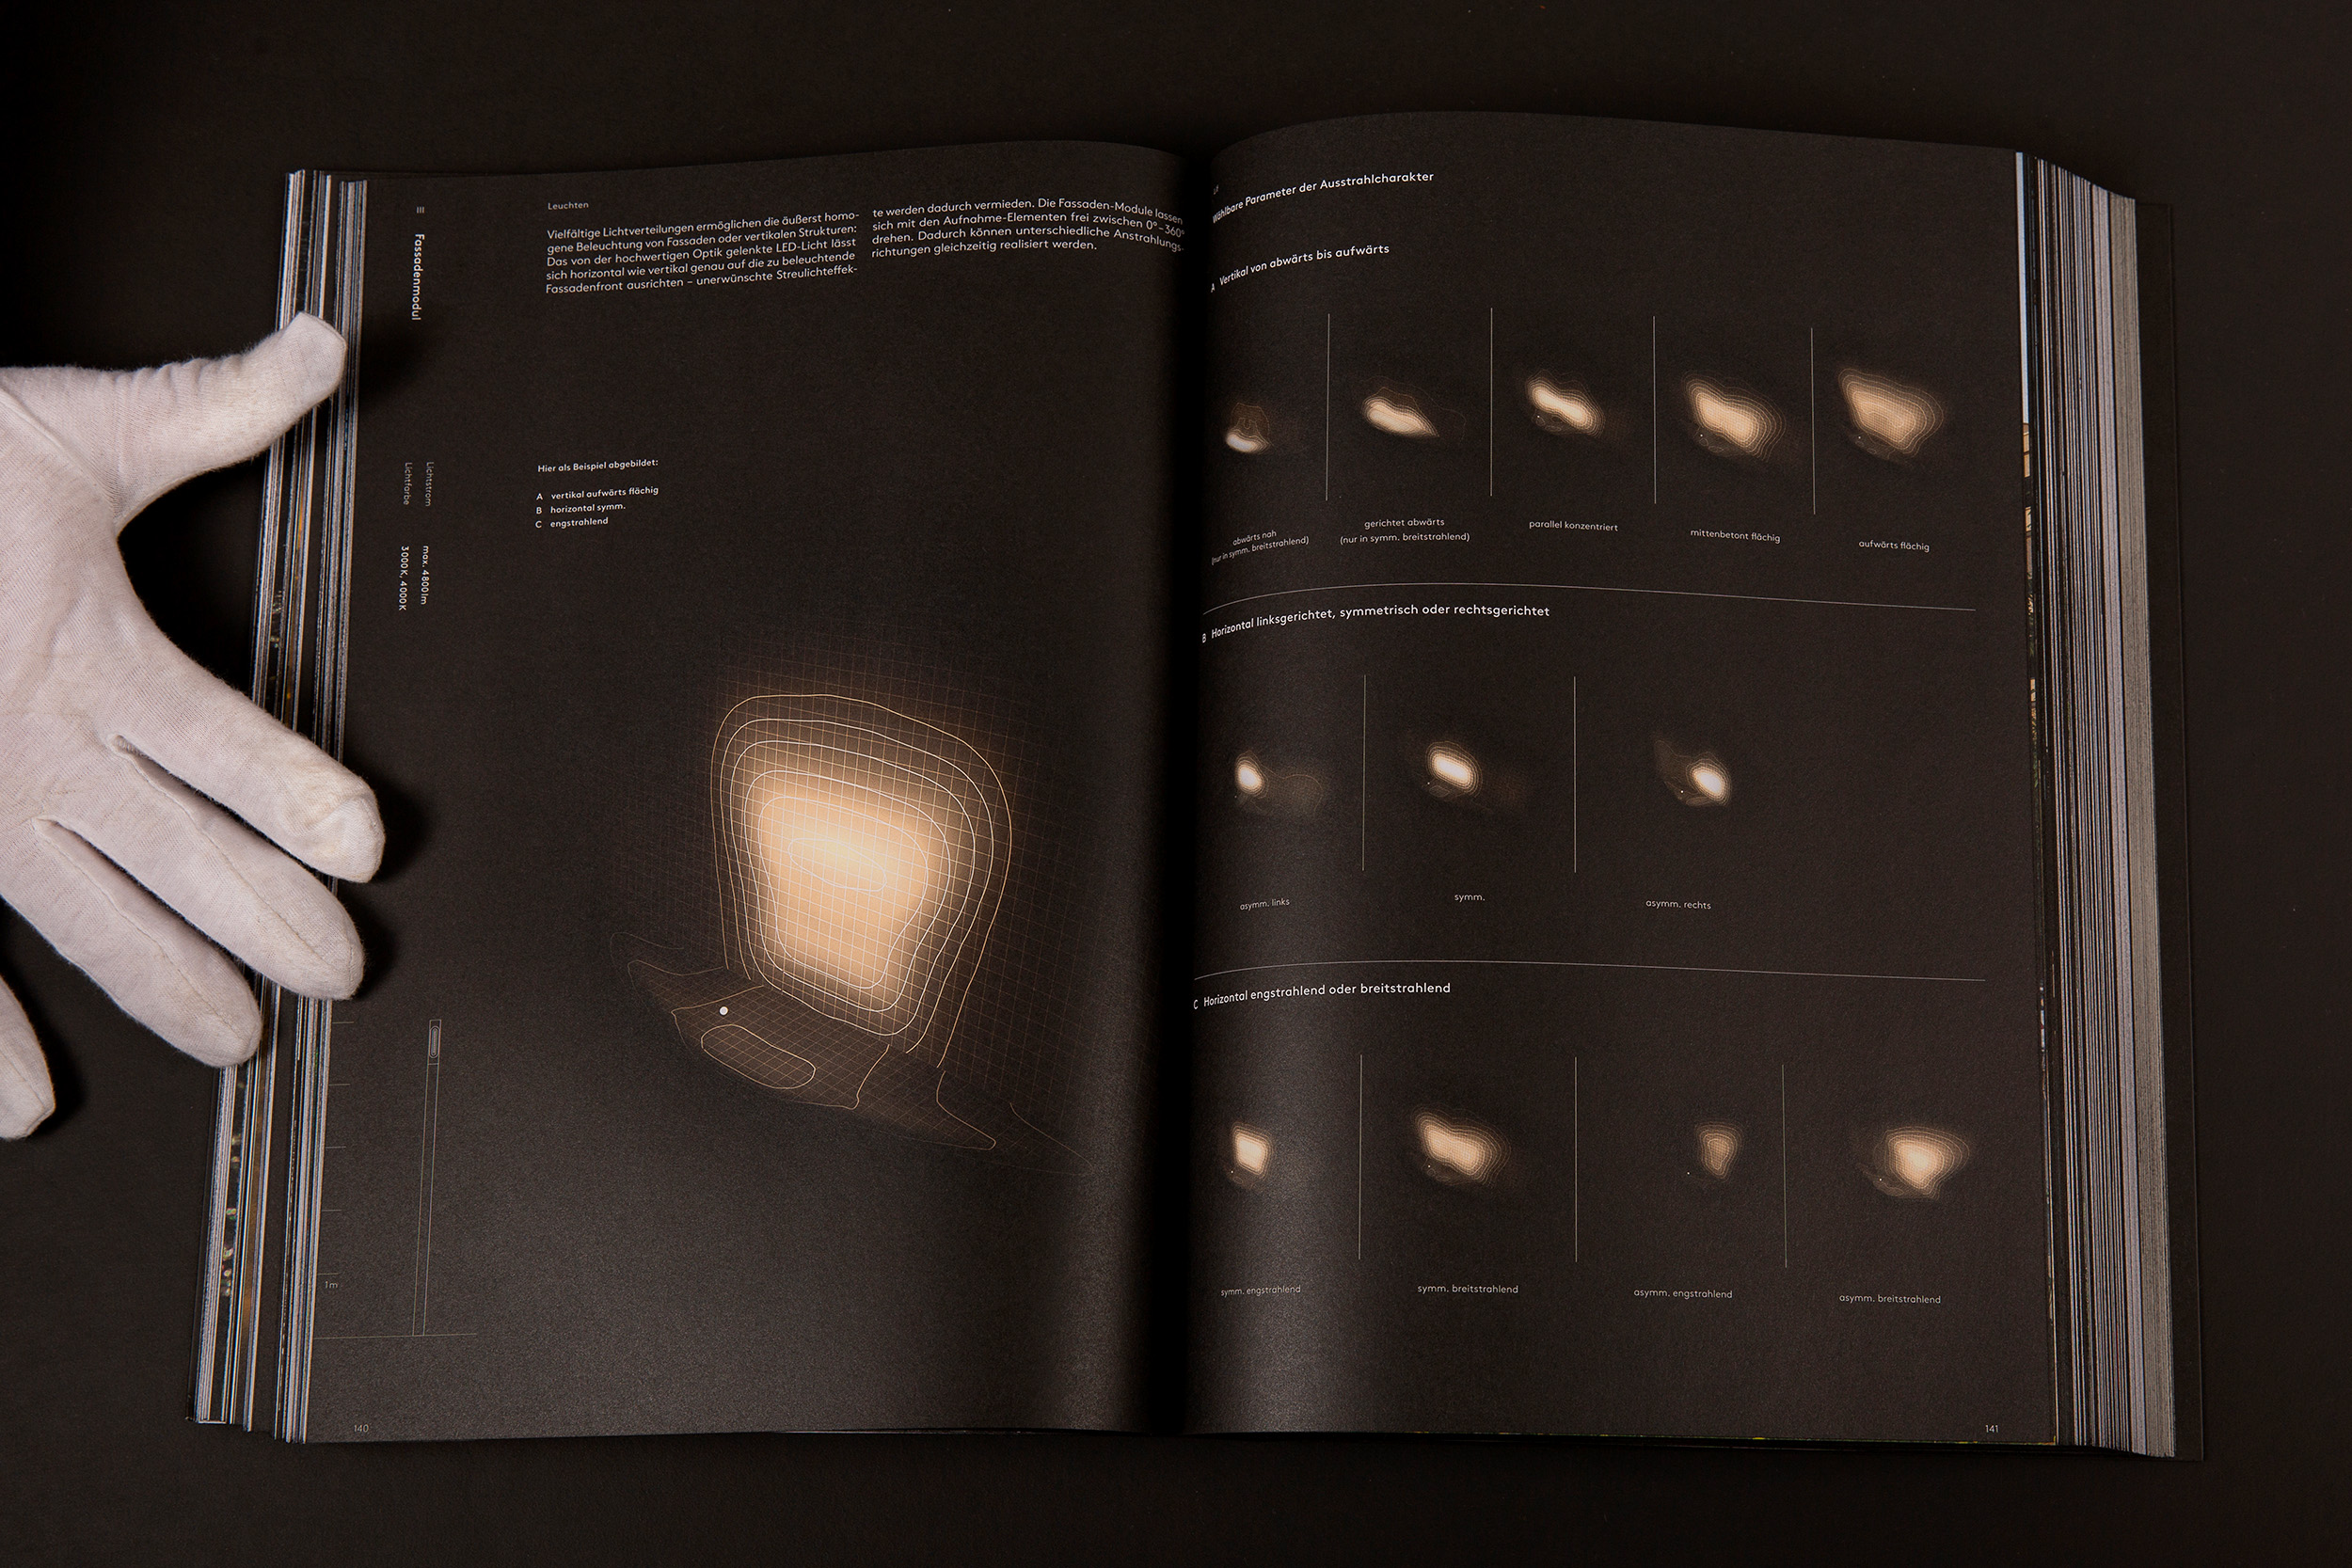 An image of Selux Imagebook, showcasing a double page spread of the Lif Facade Module light distributions against a black background.